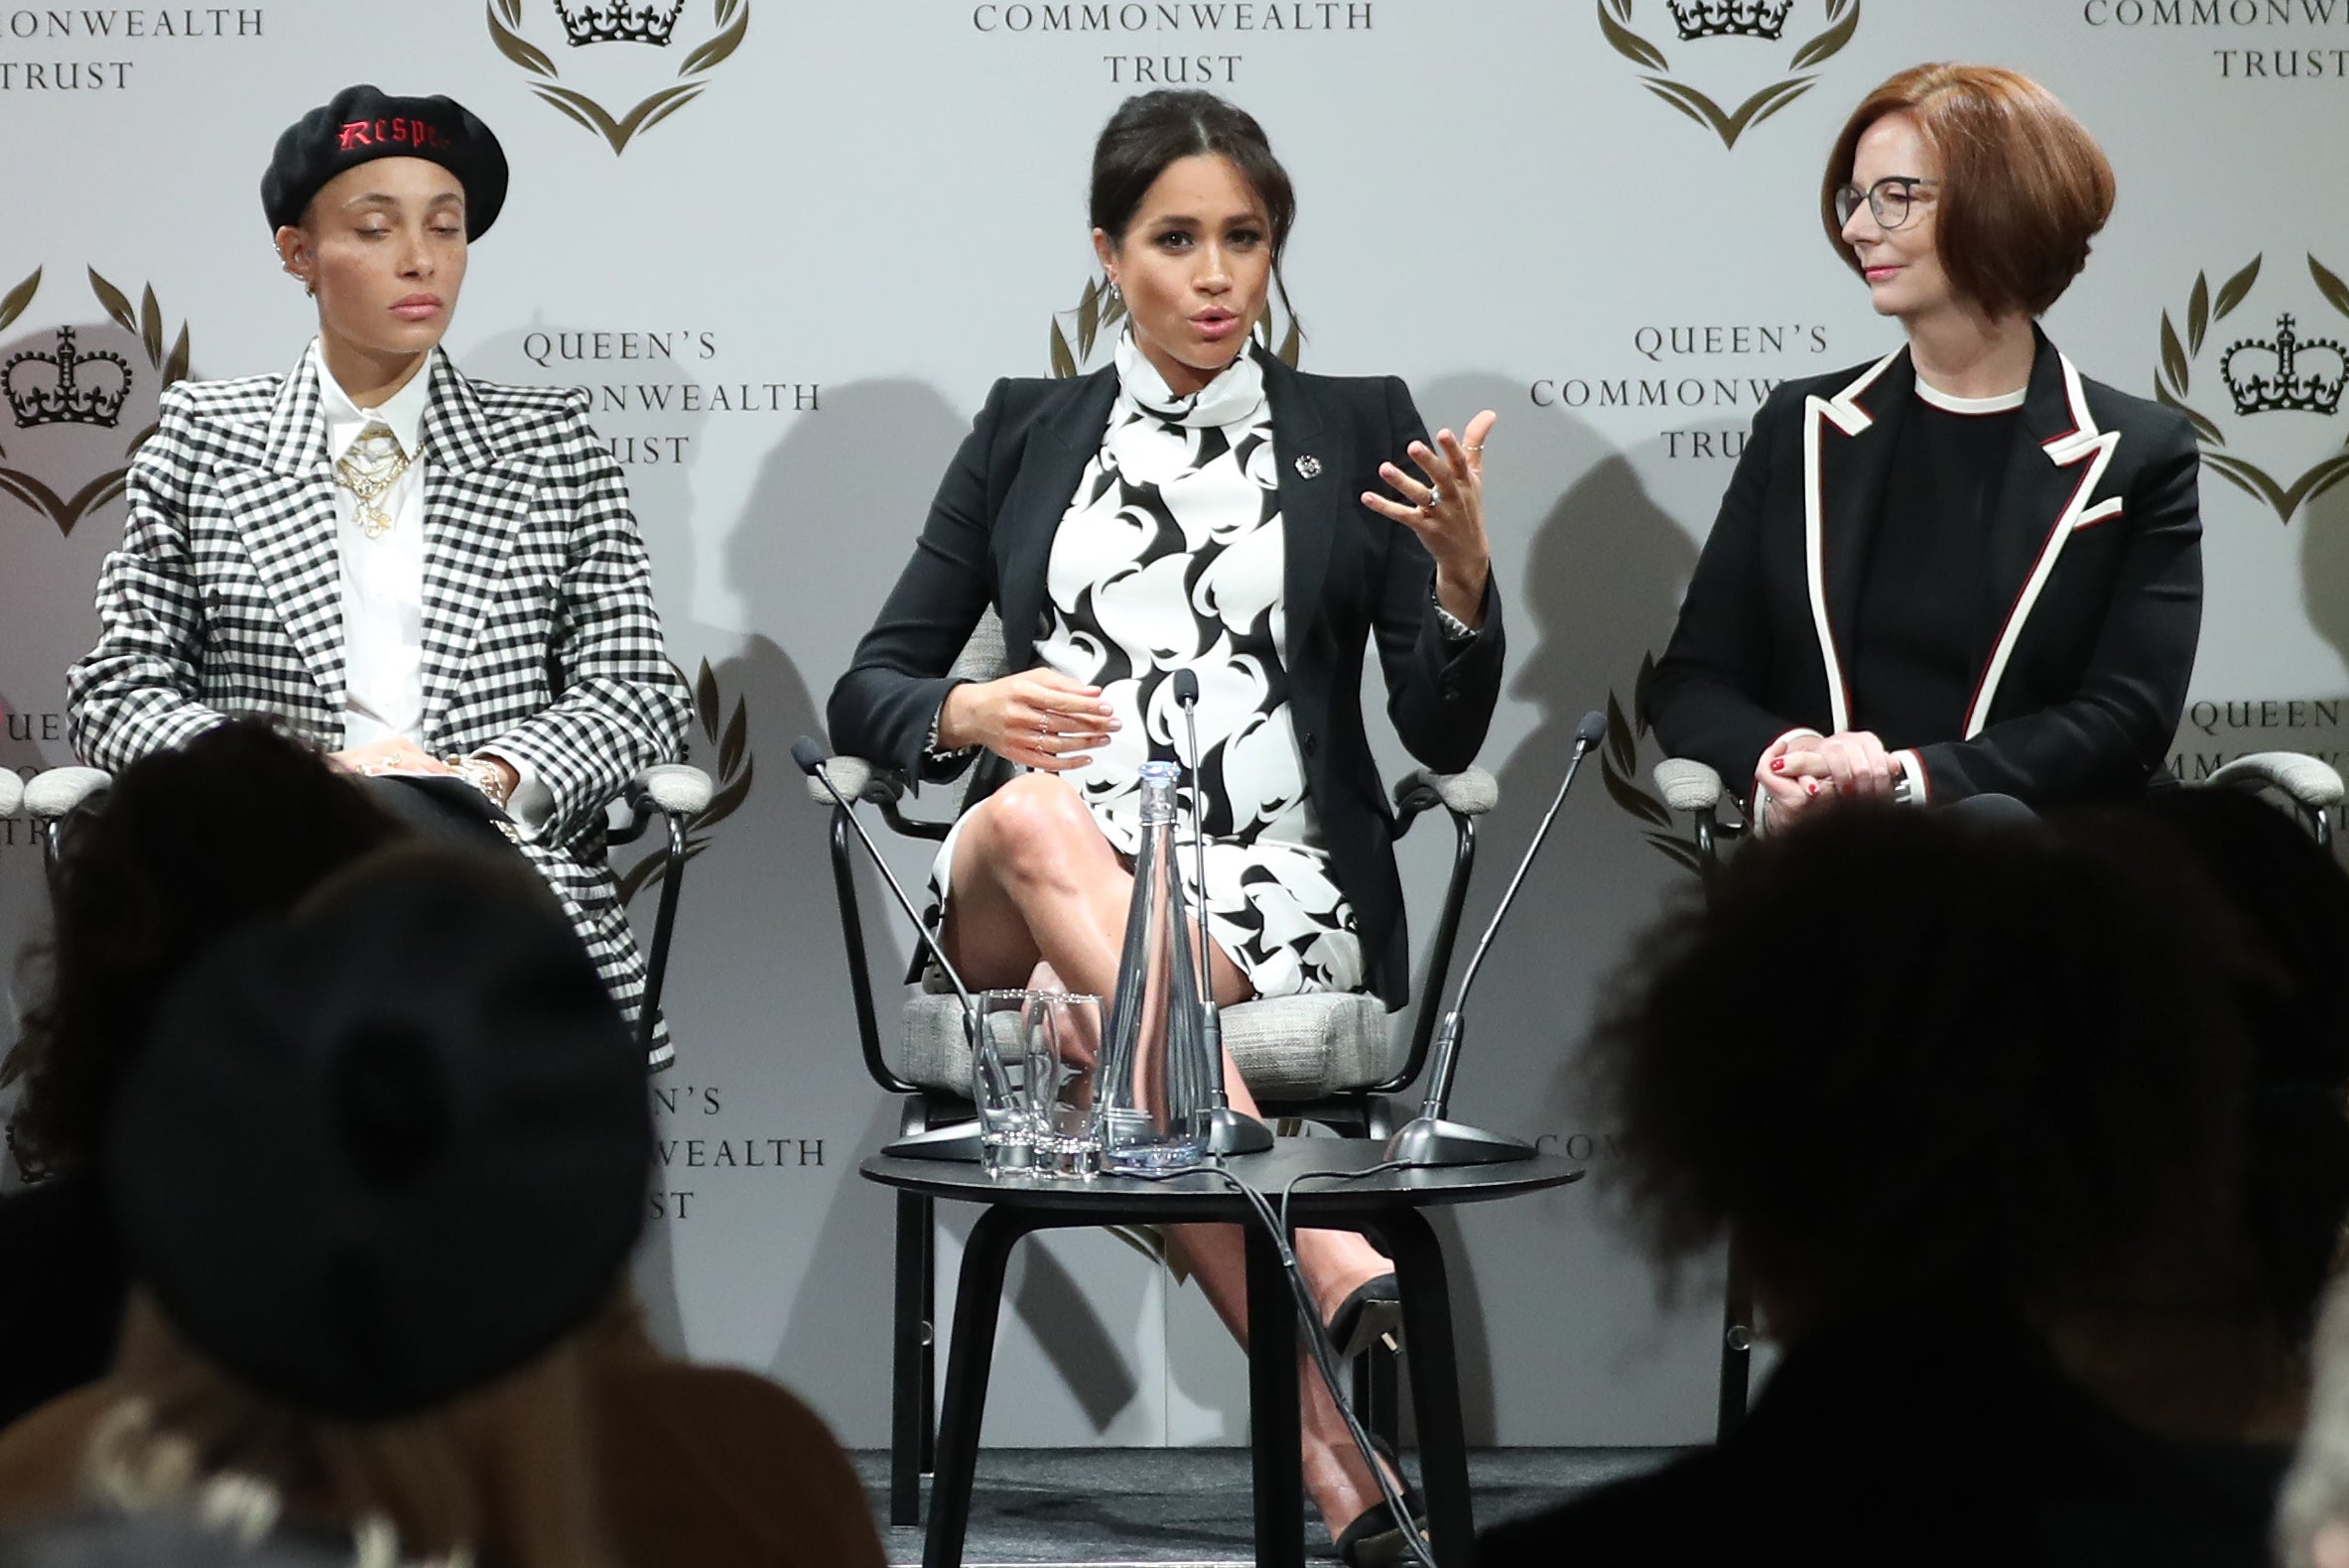 Meghan Markle talks about feminist during a panel discussion to celebrate International Women’s Day, 8 March 2019